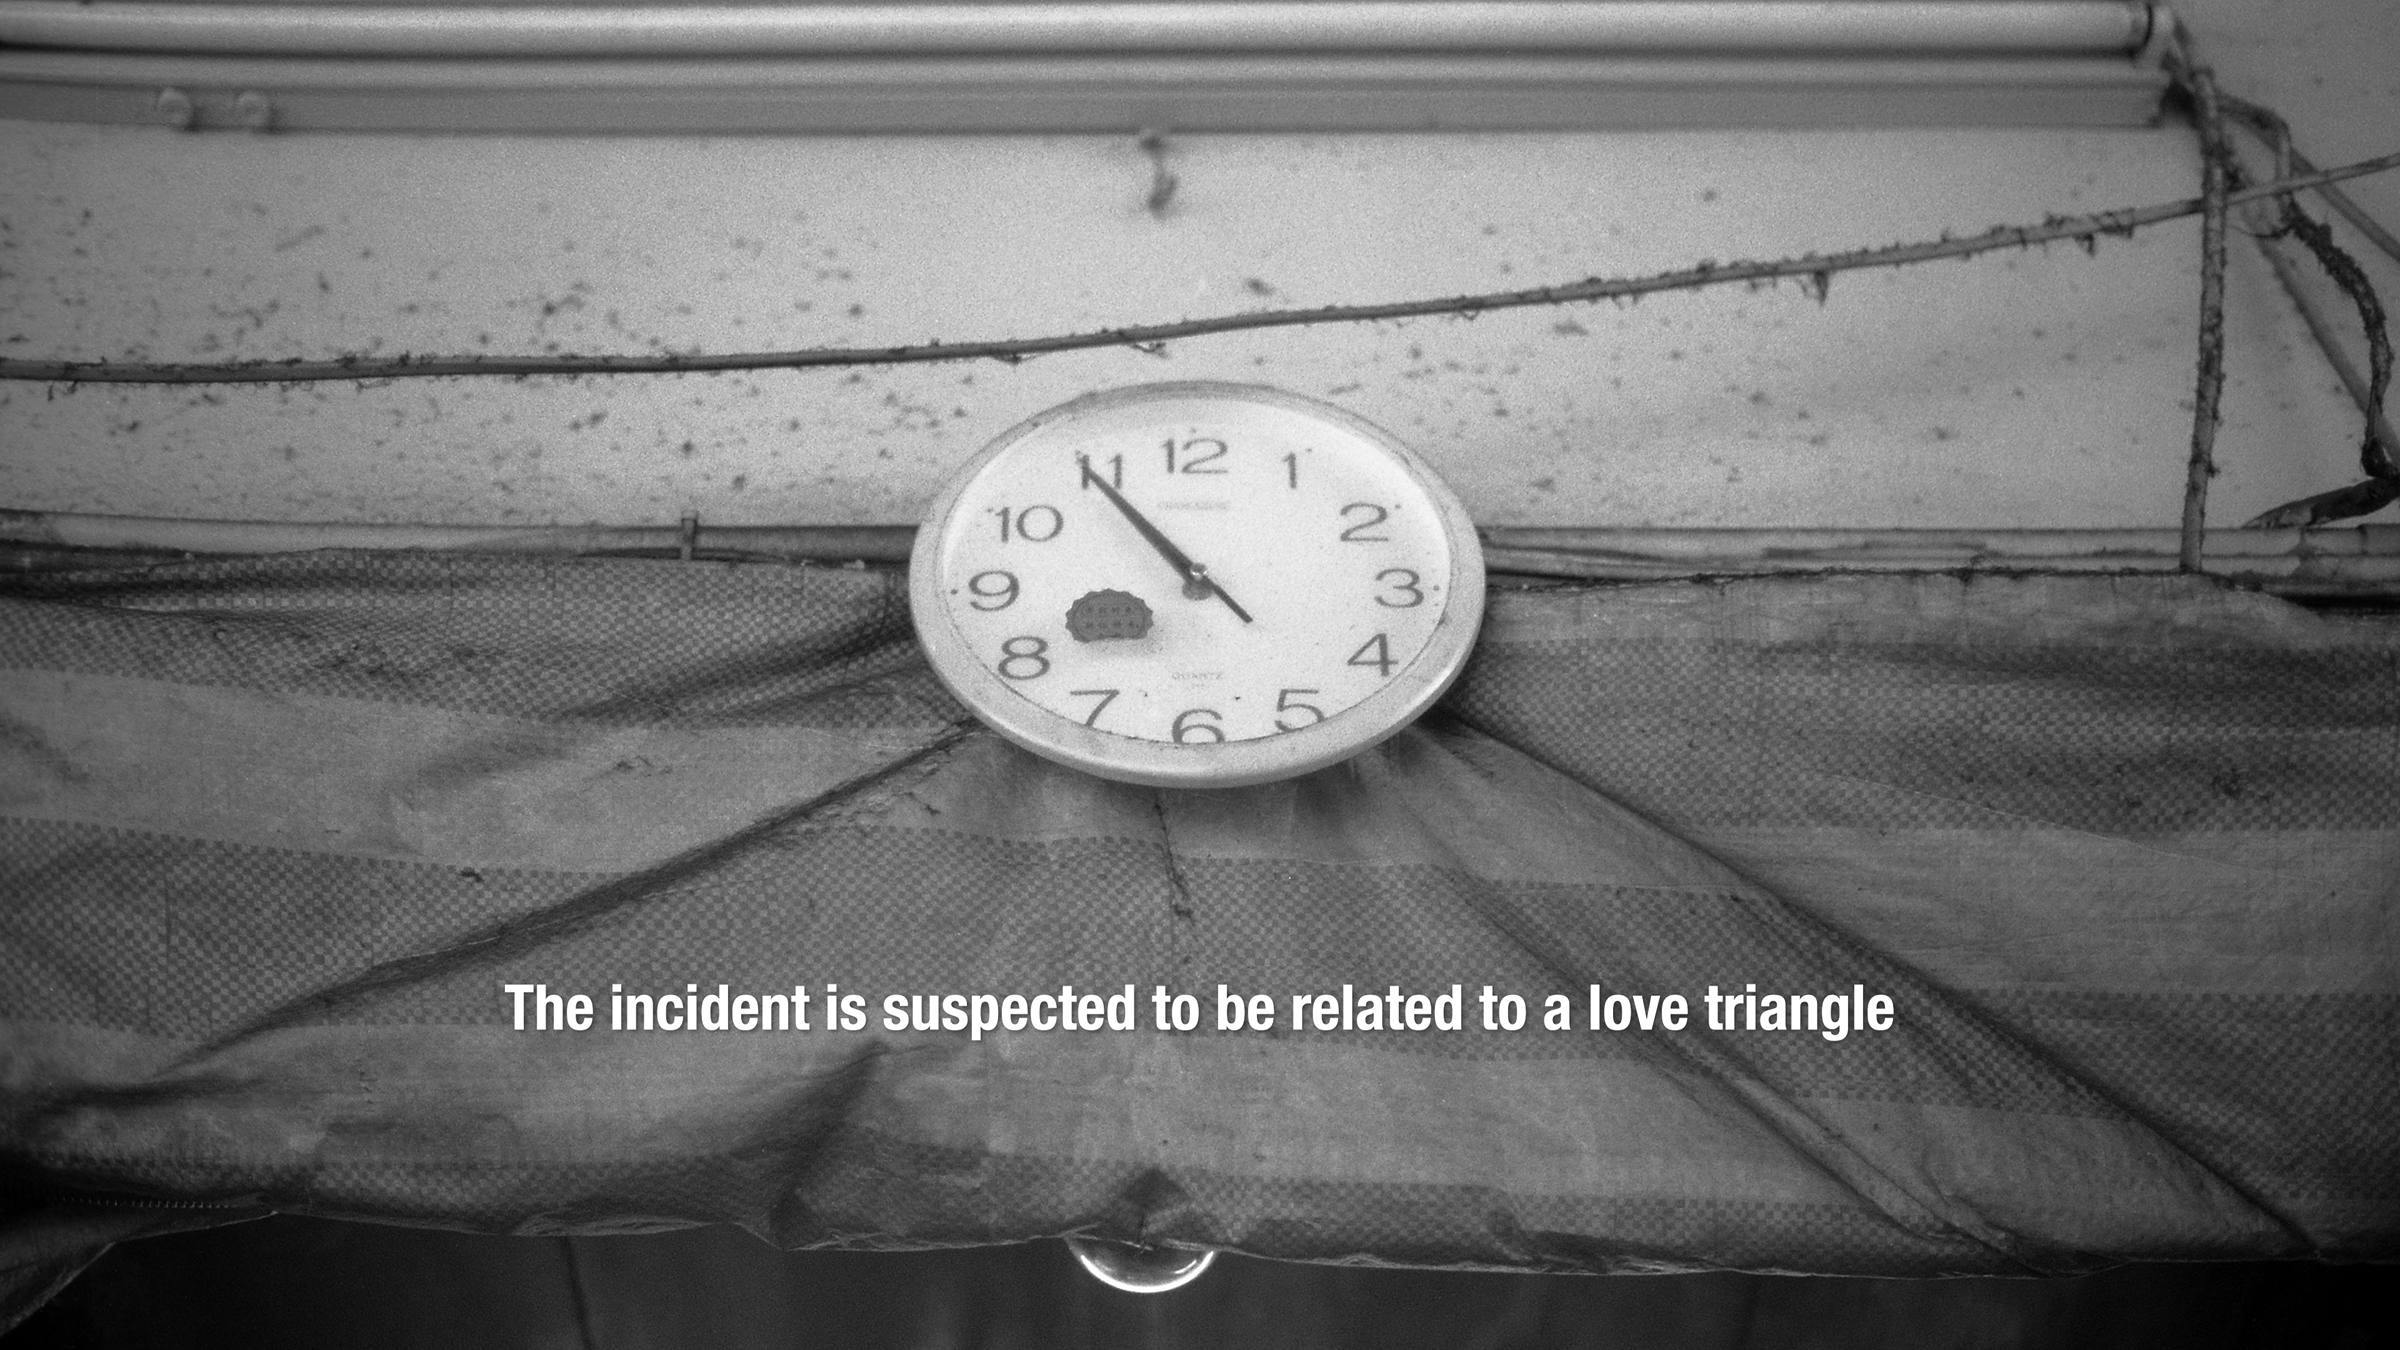 Black and white image of a clock fixed to a wall. The words 'The incident is suspected to be related to a love triangle' are superimposed on top.